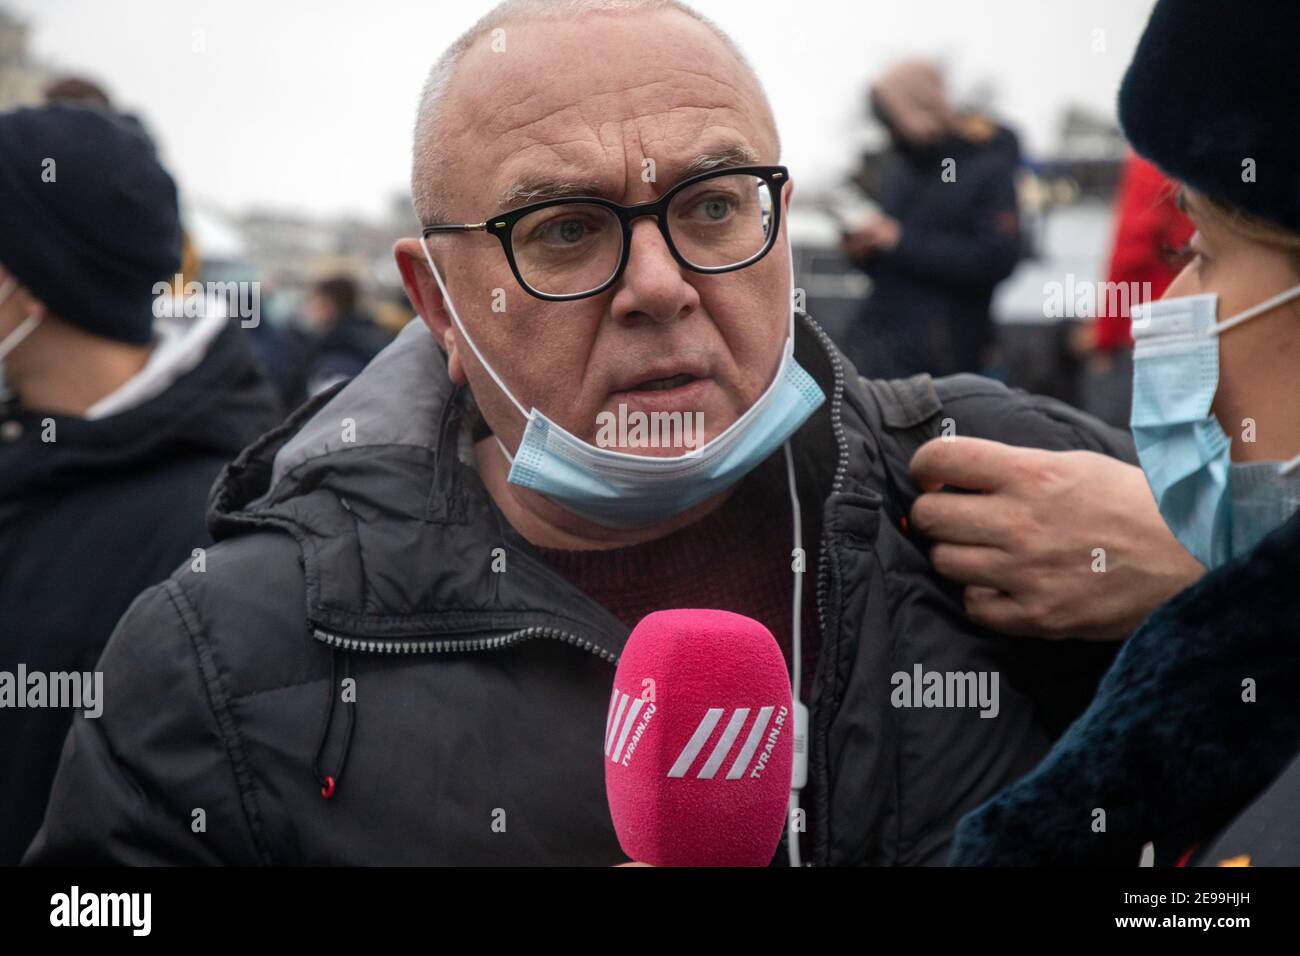 Moscow, Russia. 23rd of January, 2021 Journalist of the Rain TV Channel Pavel Lobkov interviews participants of an unsanctioned rally in support of Russian opposition leader Alexei Navalny at Pushkinskaya square in the center of Moscow city, Russia Stock Photo